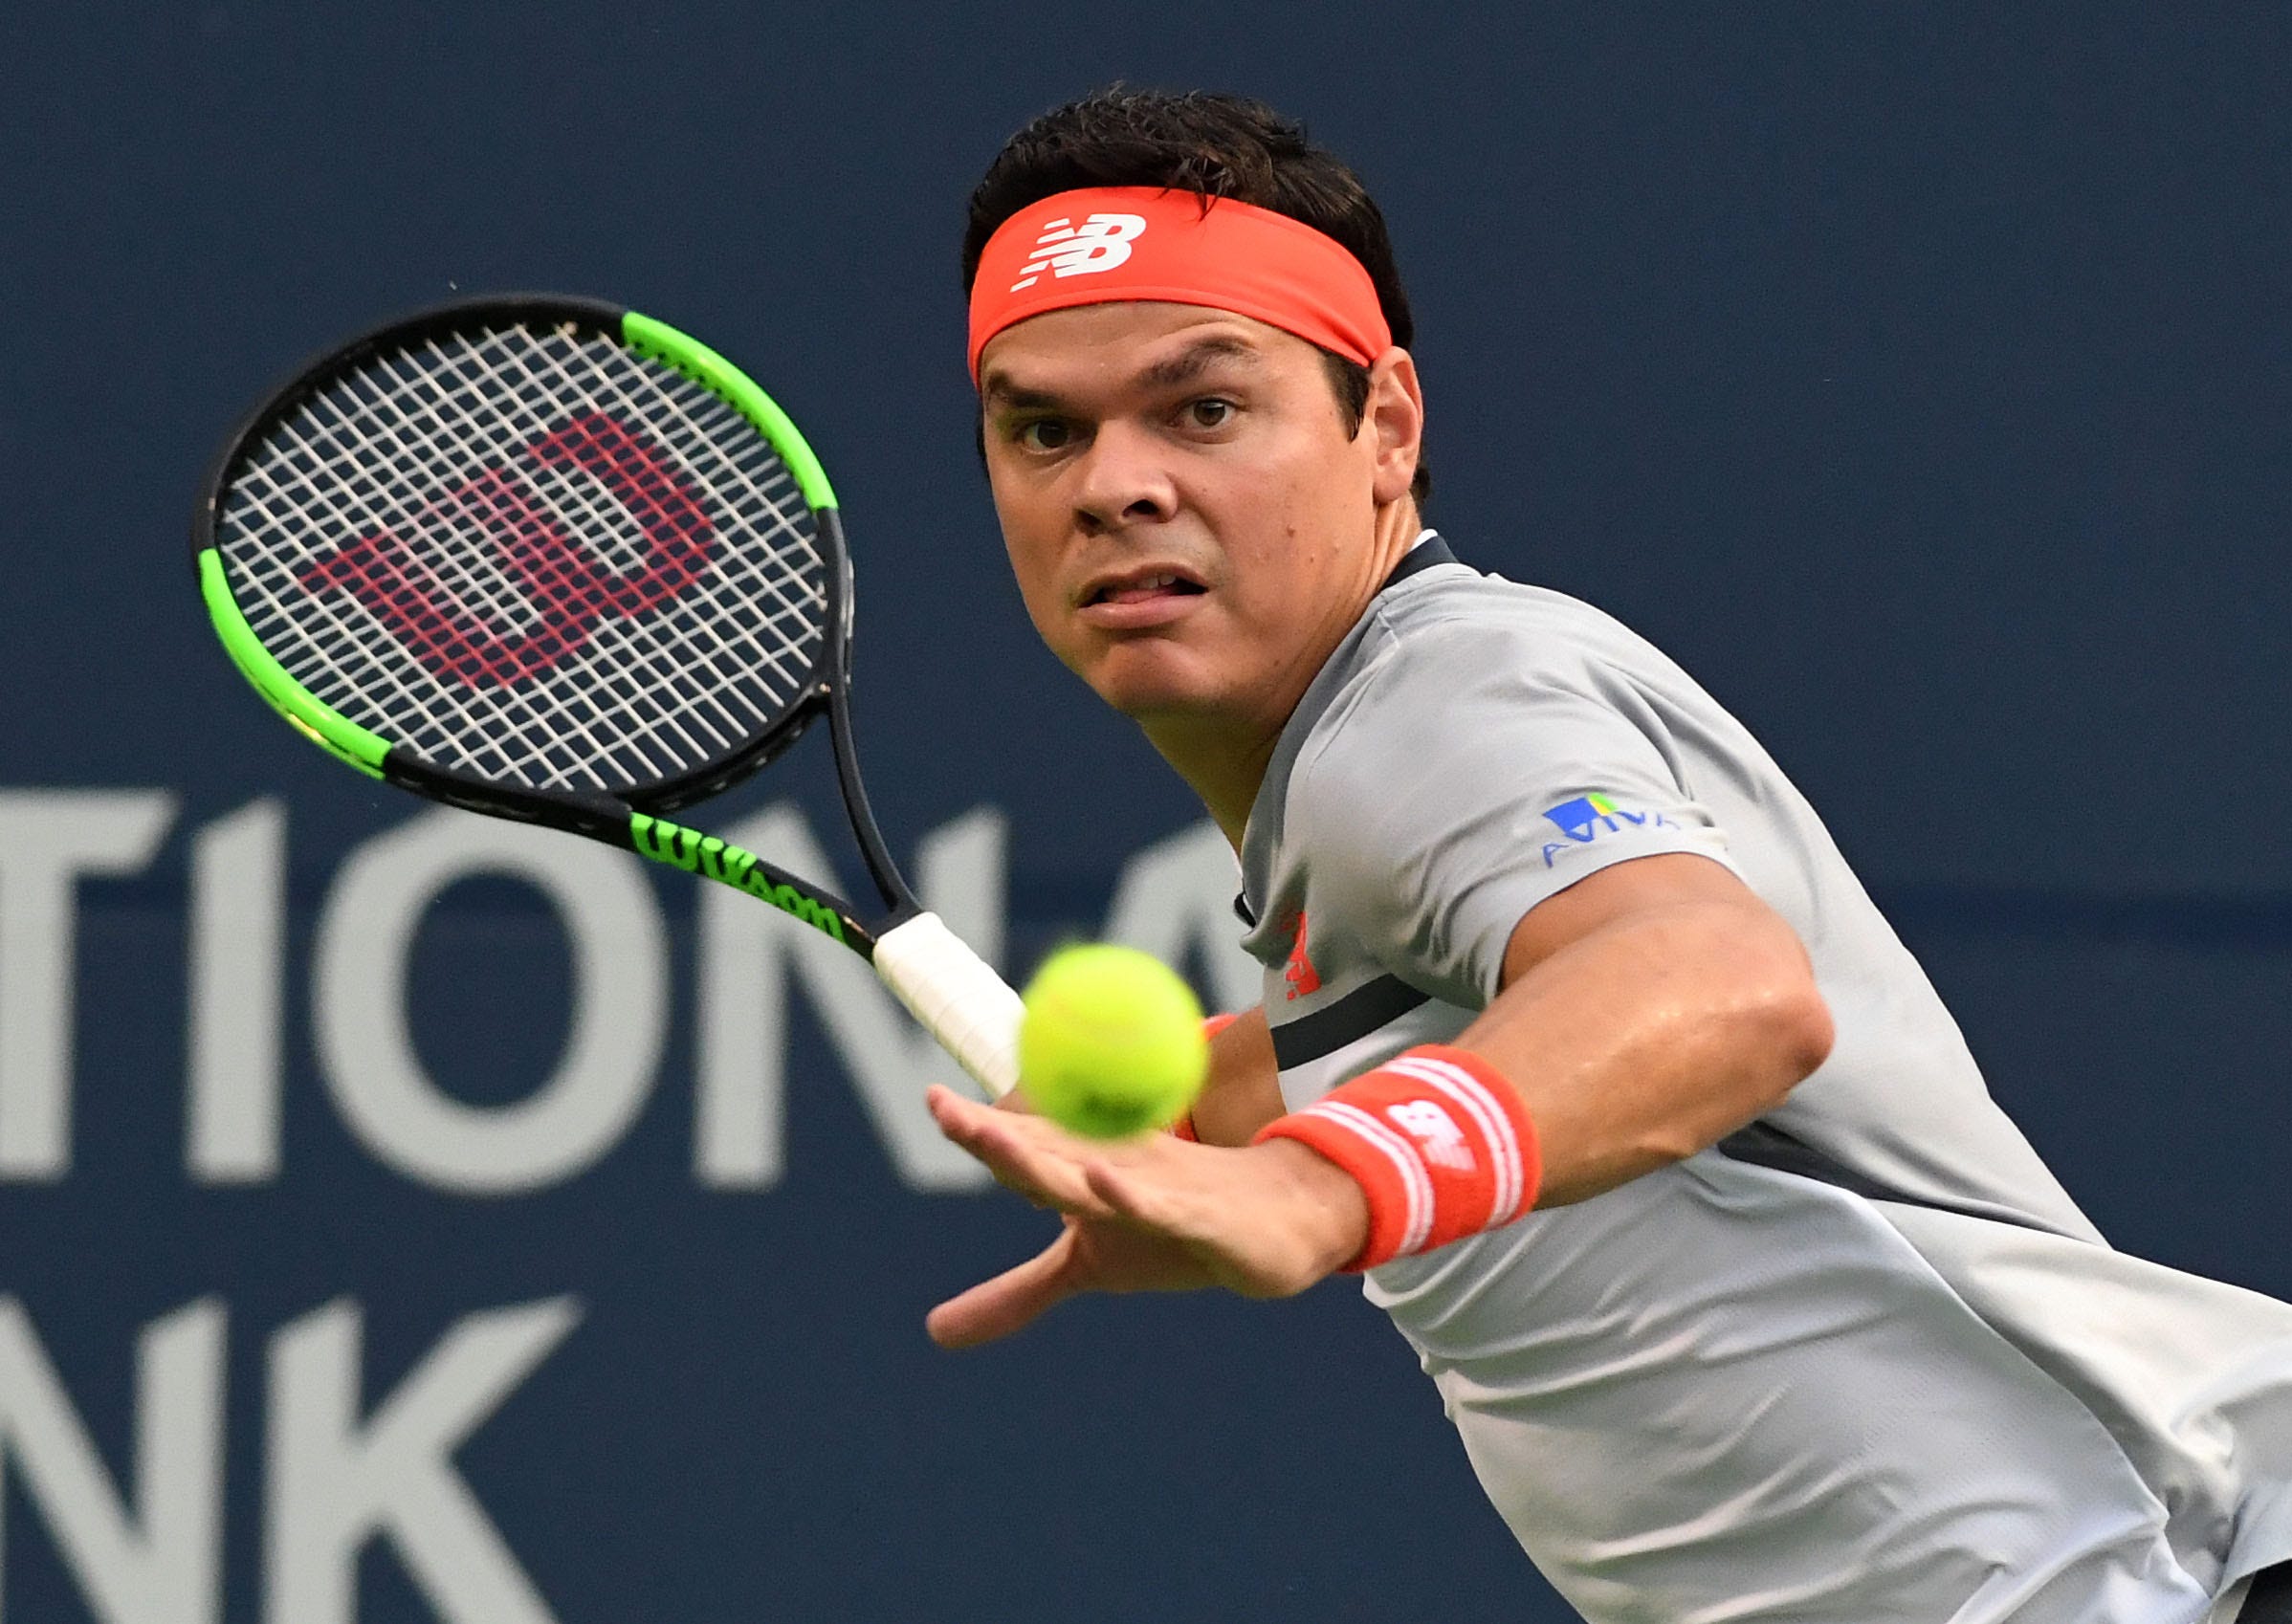 Milos Raonic, of Canada, plays a shot against David Goffin, of Belgium, in the Rogers Cup tennis tournament at Aviva Centre in Toronto.